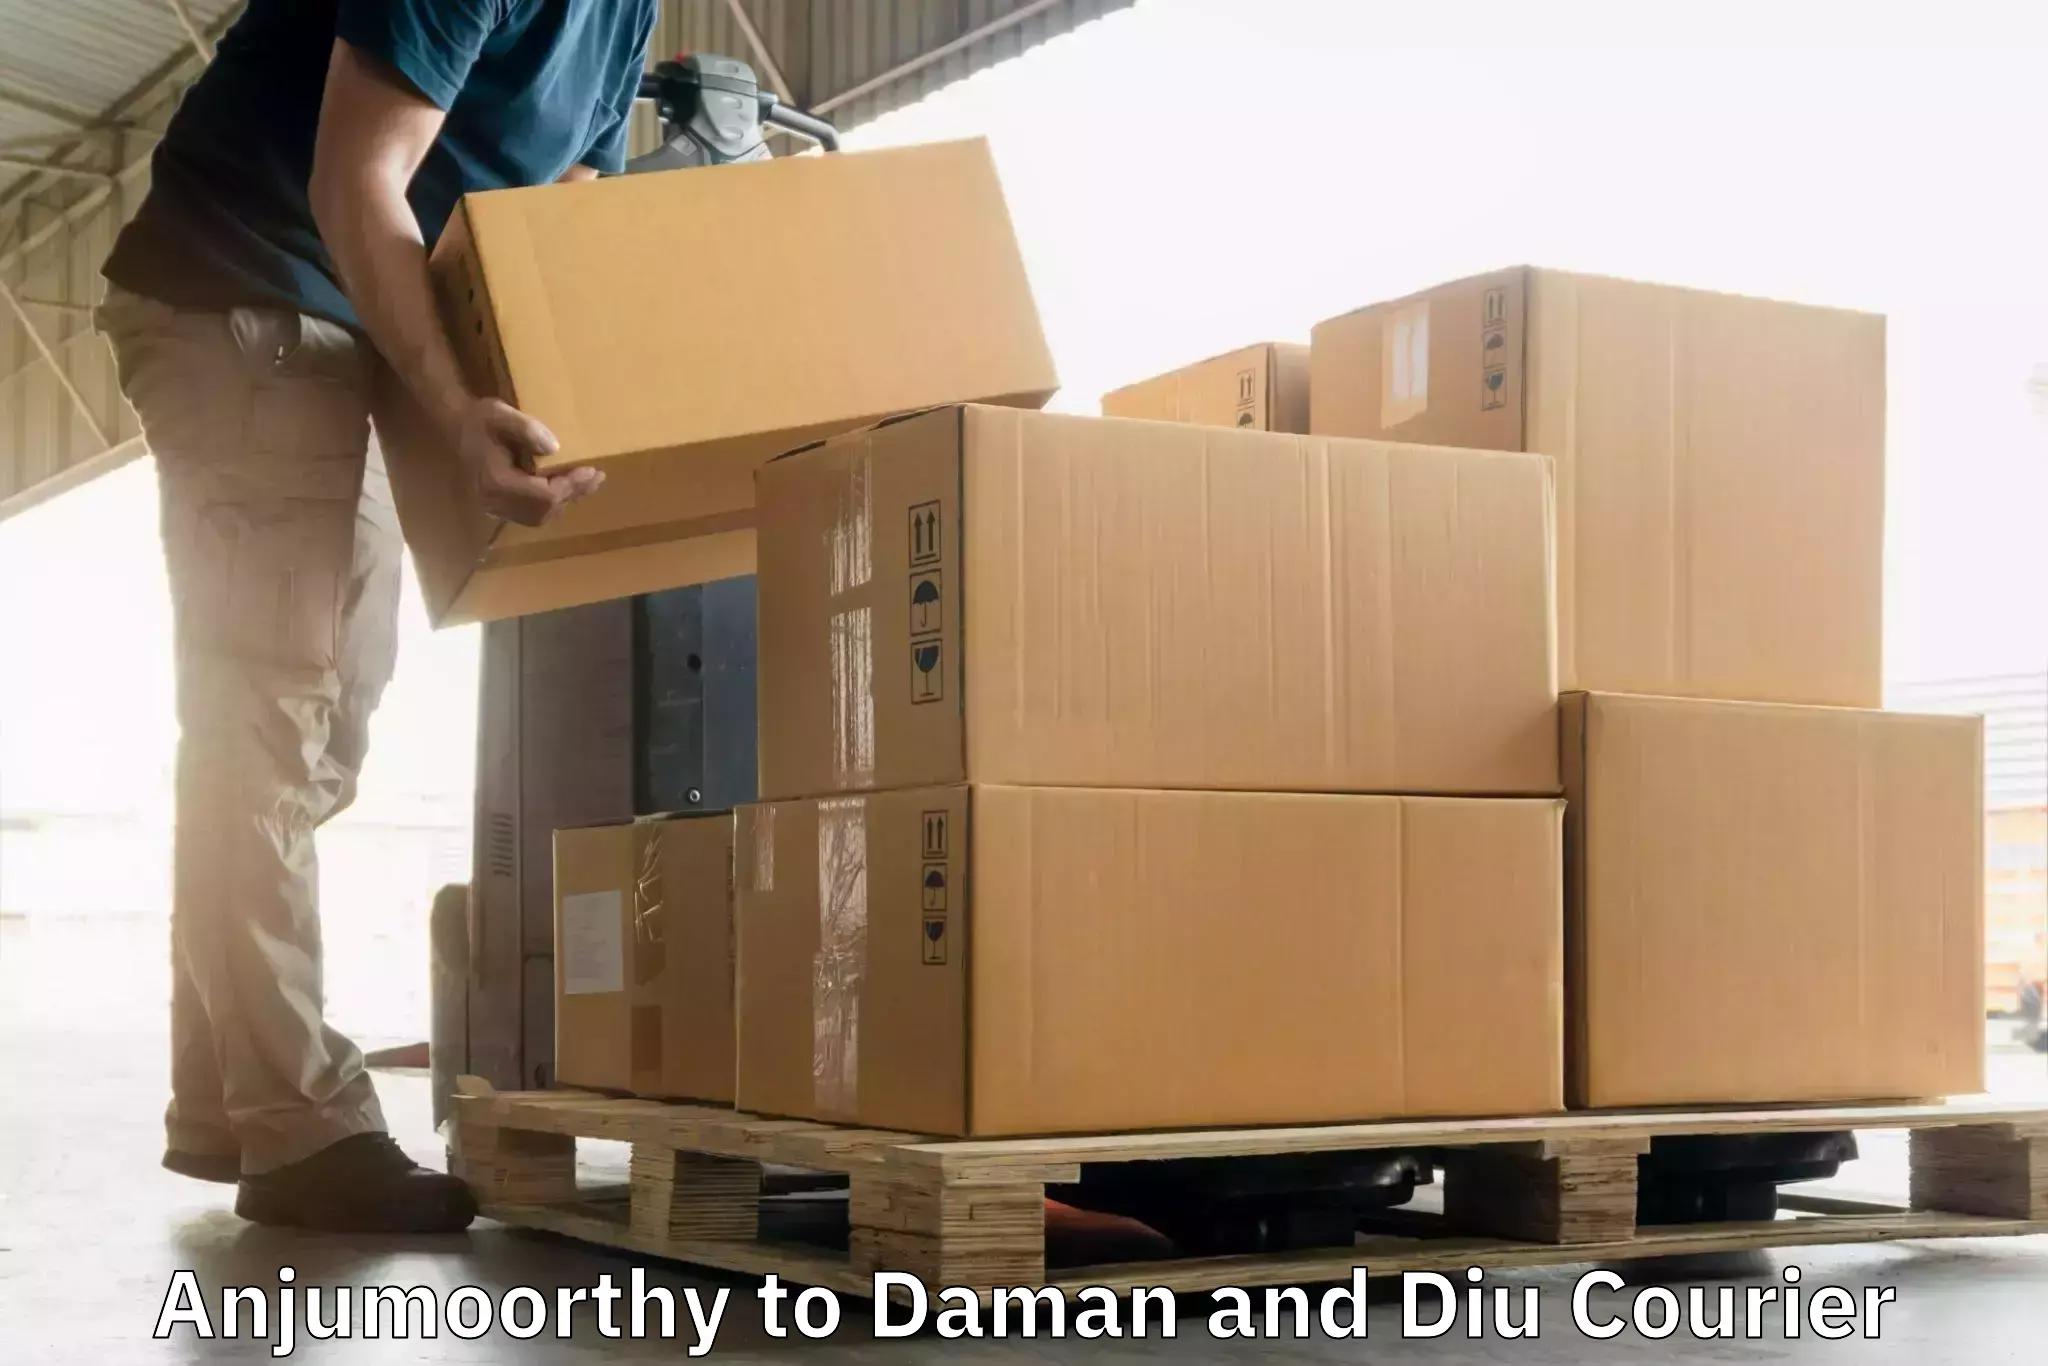 Multi-service courier options Anjumoorthy to Diu